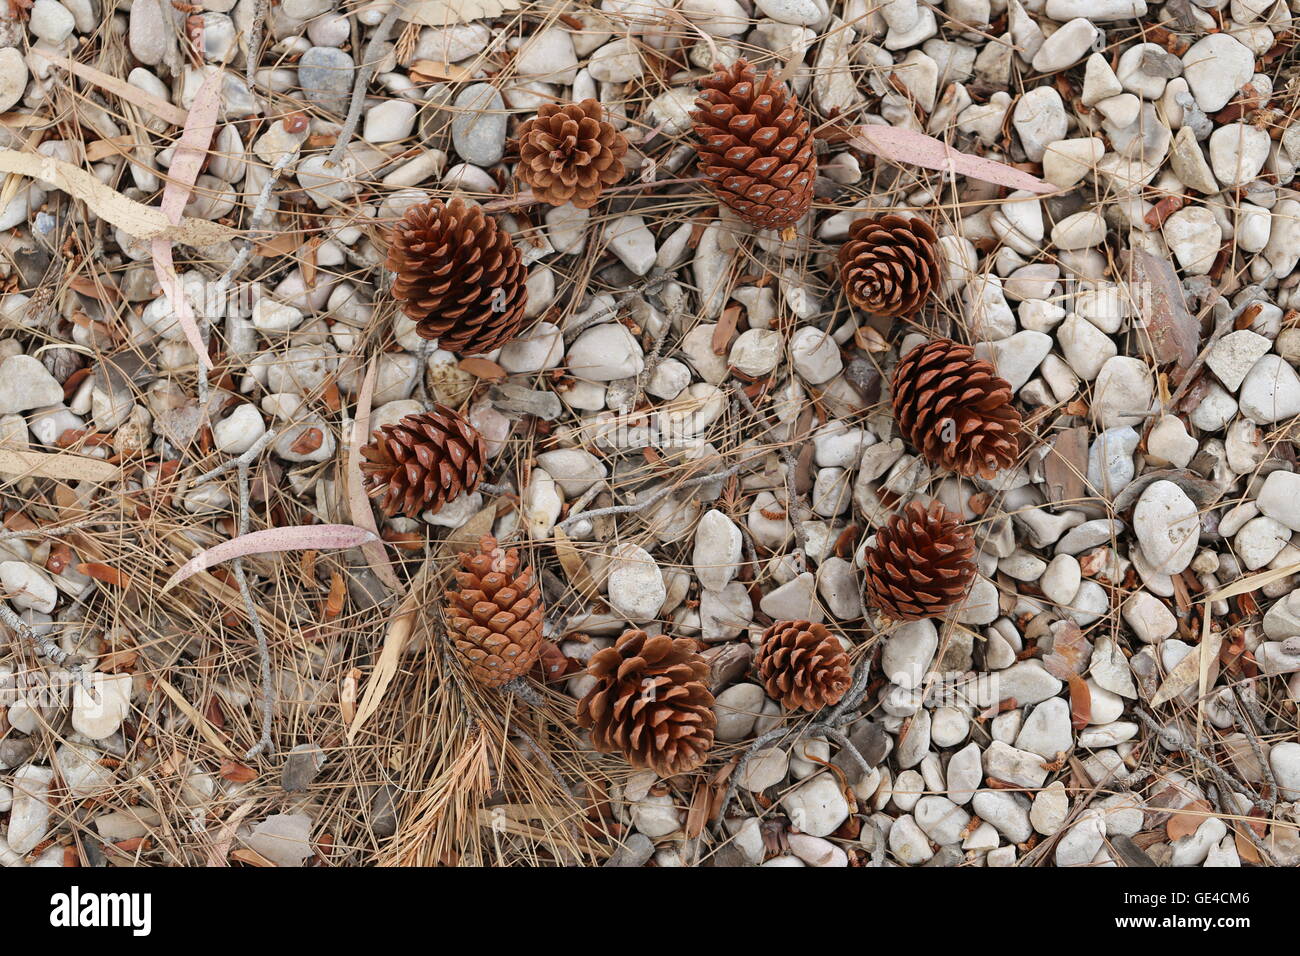 Pine Cones in a Circle. Ten pine cones, 10 dry fruits of a conifer arranged in a circle on the ground. Stock Photo